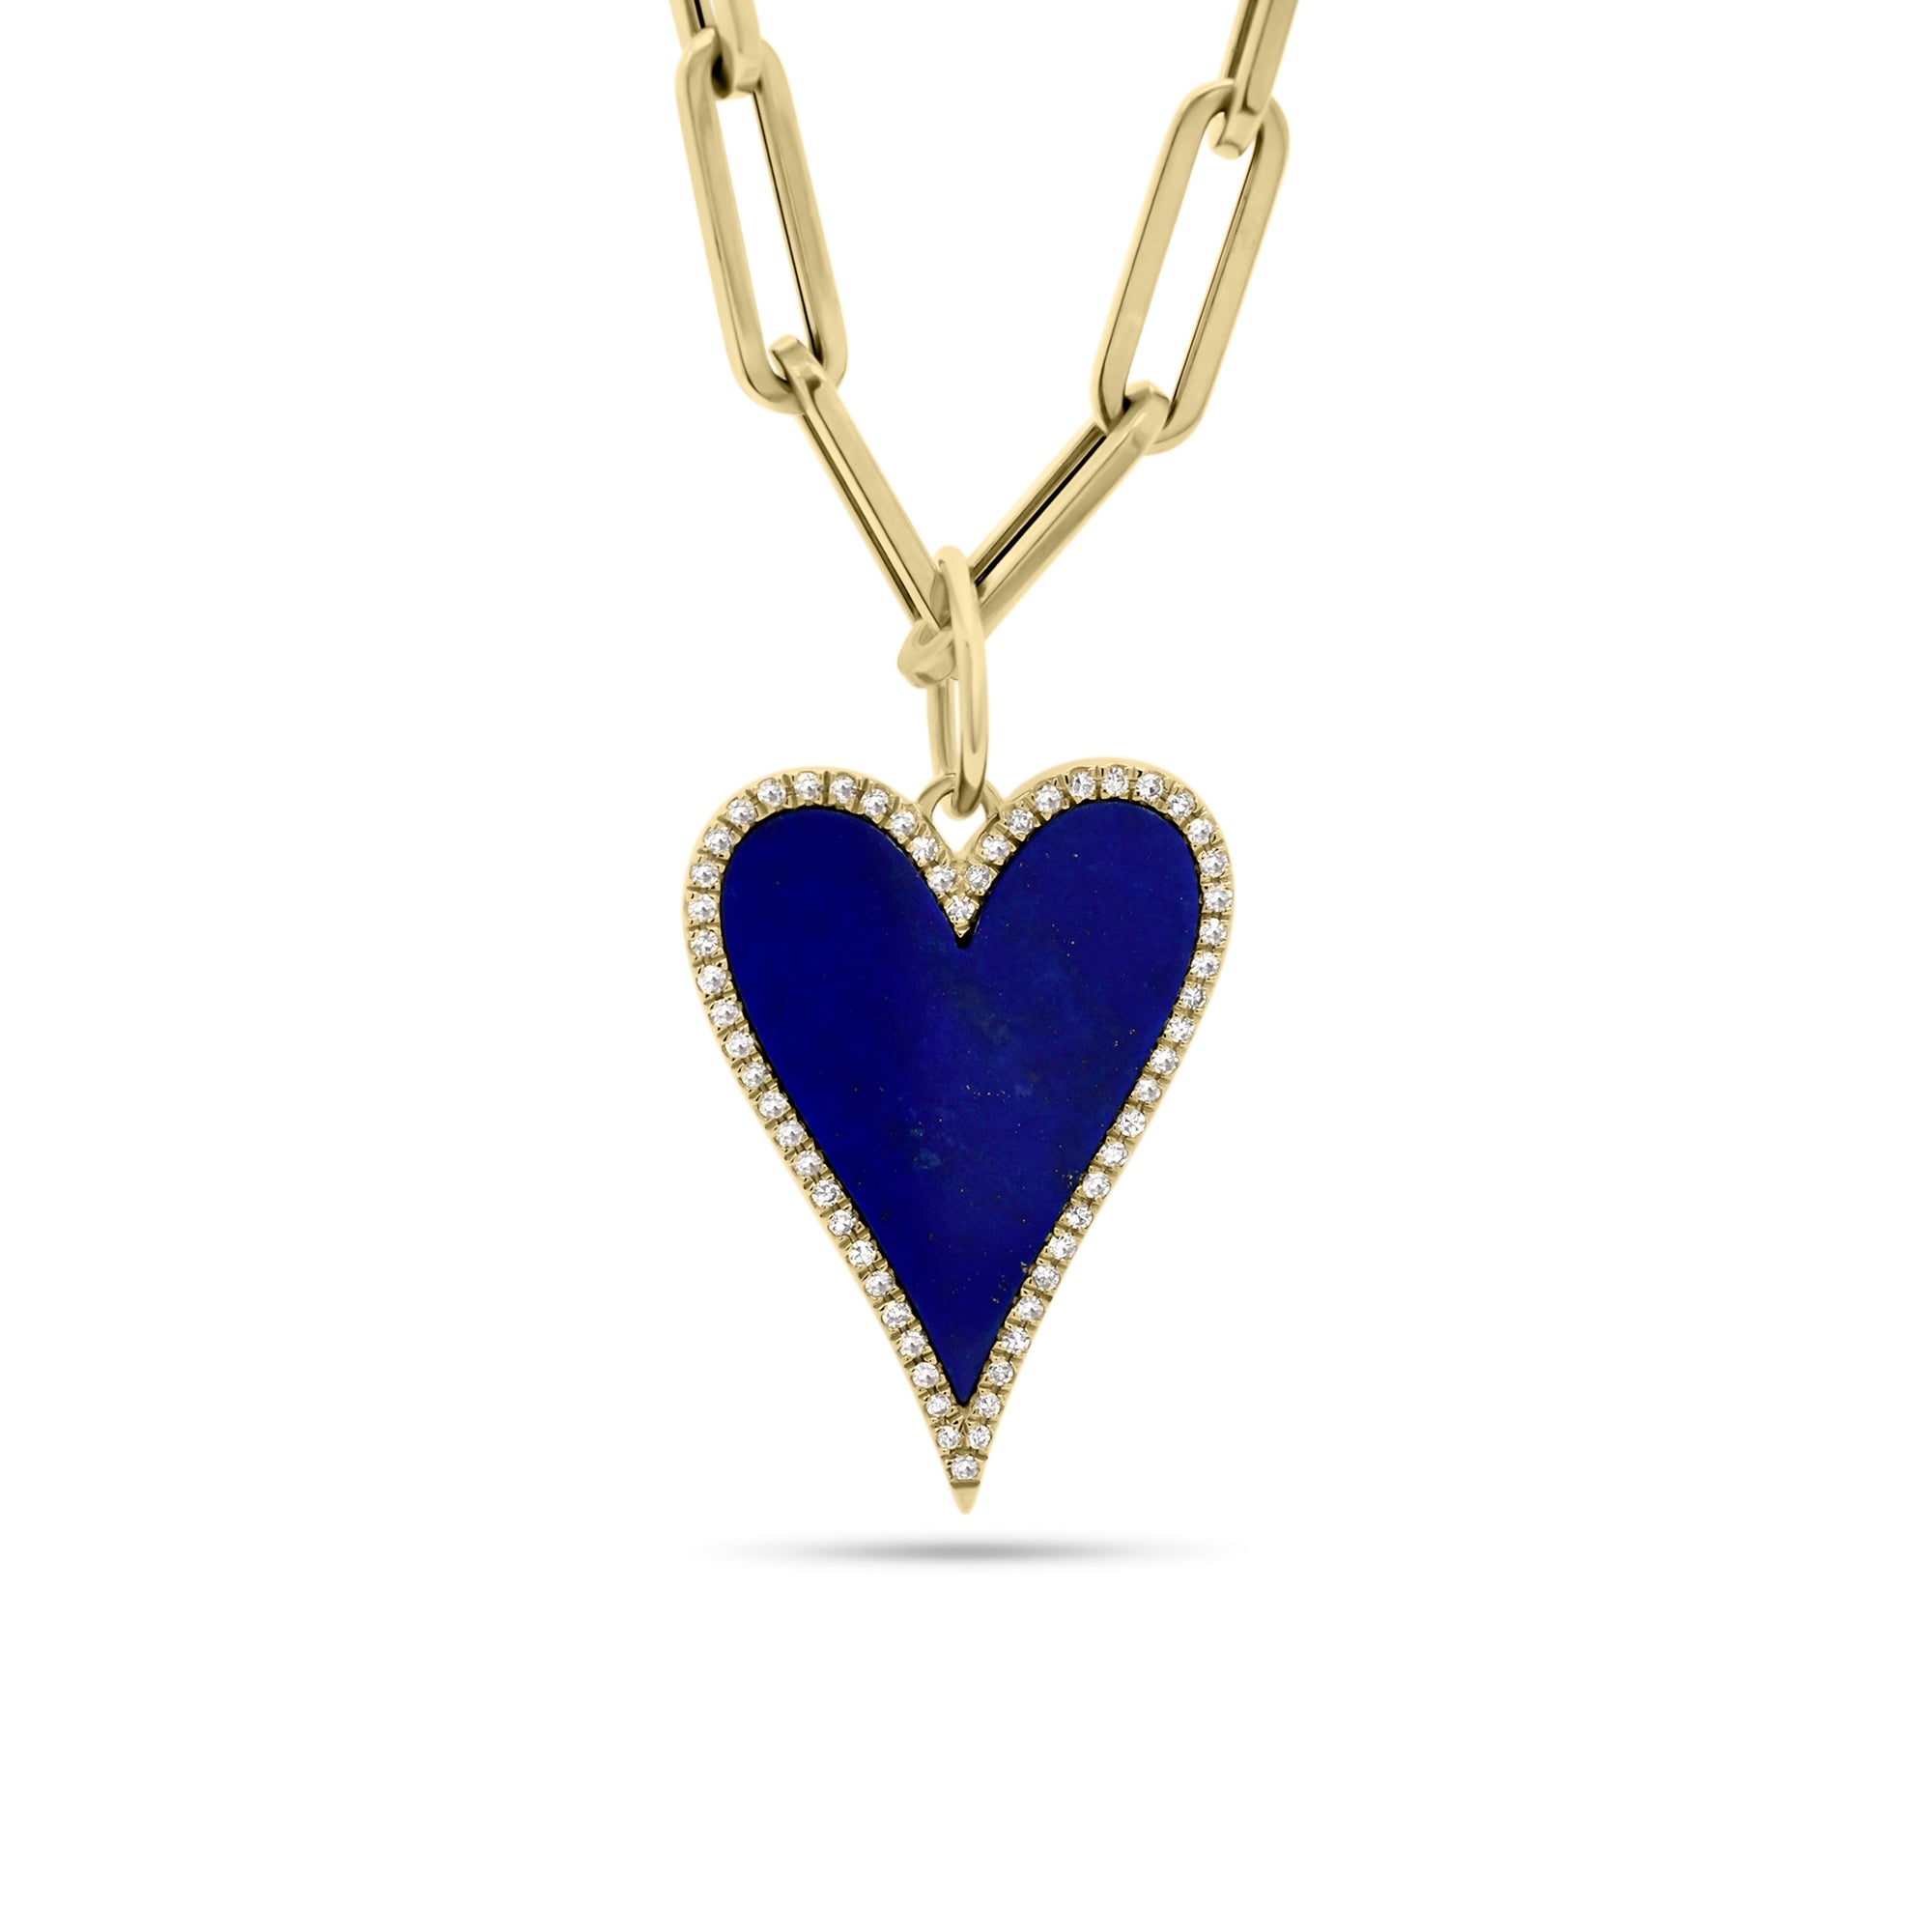 Lapis & Diamond Heart Pendant - 14K gold weighing 1.30 grams - 58 round diamonds totaling 0.15 carats - Lapis. Available in yellow, white, and rose gold.